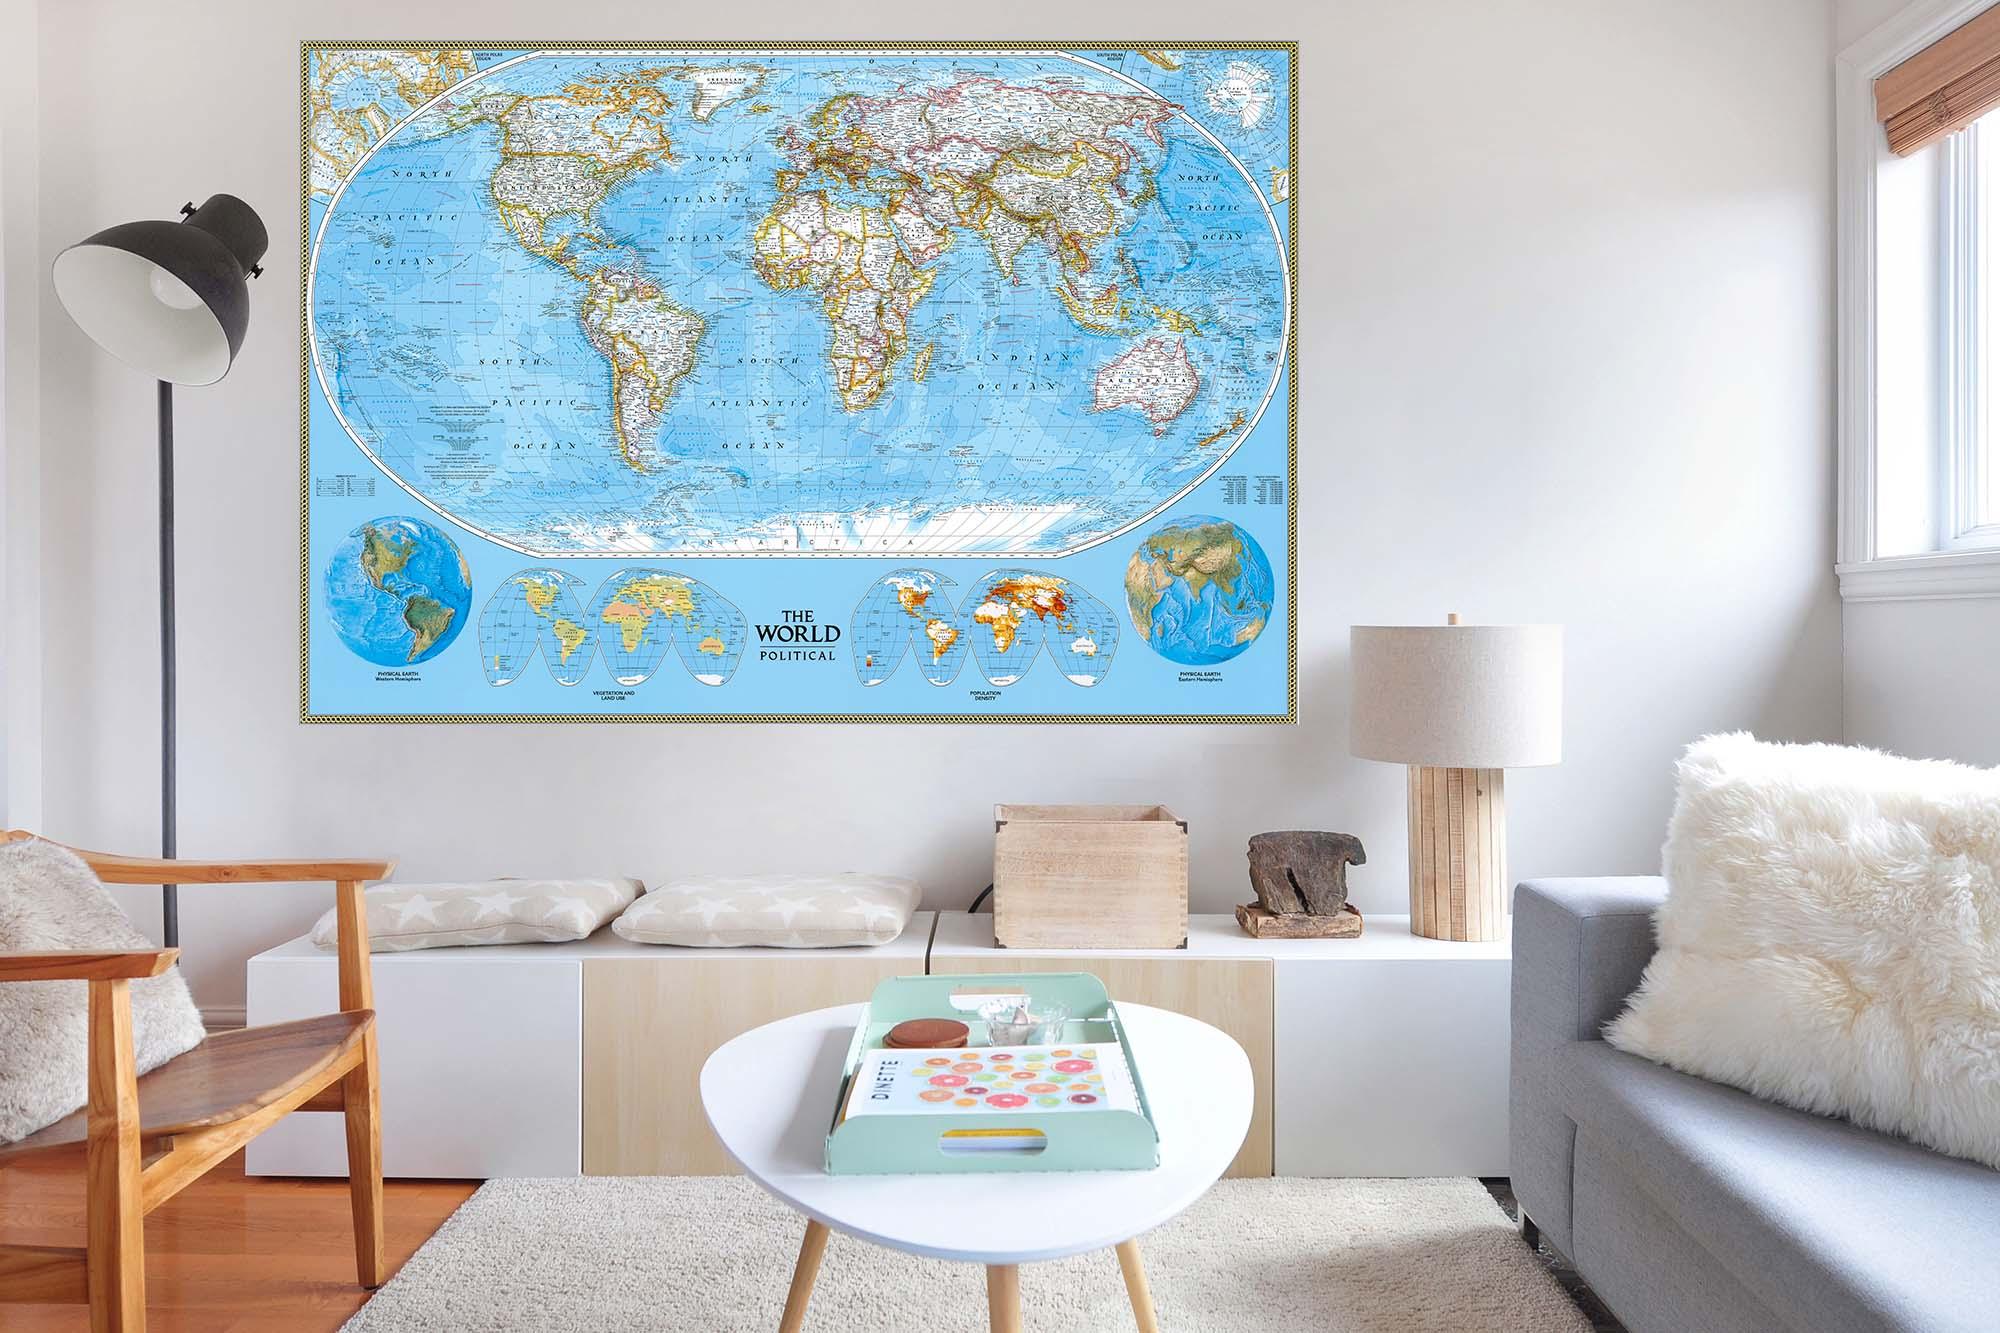 Political World Map Wall Decal Sticker Wallpaper, PEEL-N-STICK, removable anytime. Great for a classroom - CoolWalls.ca